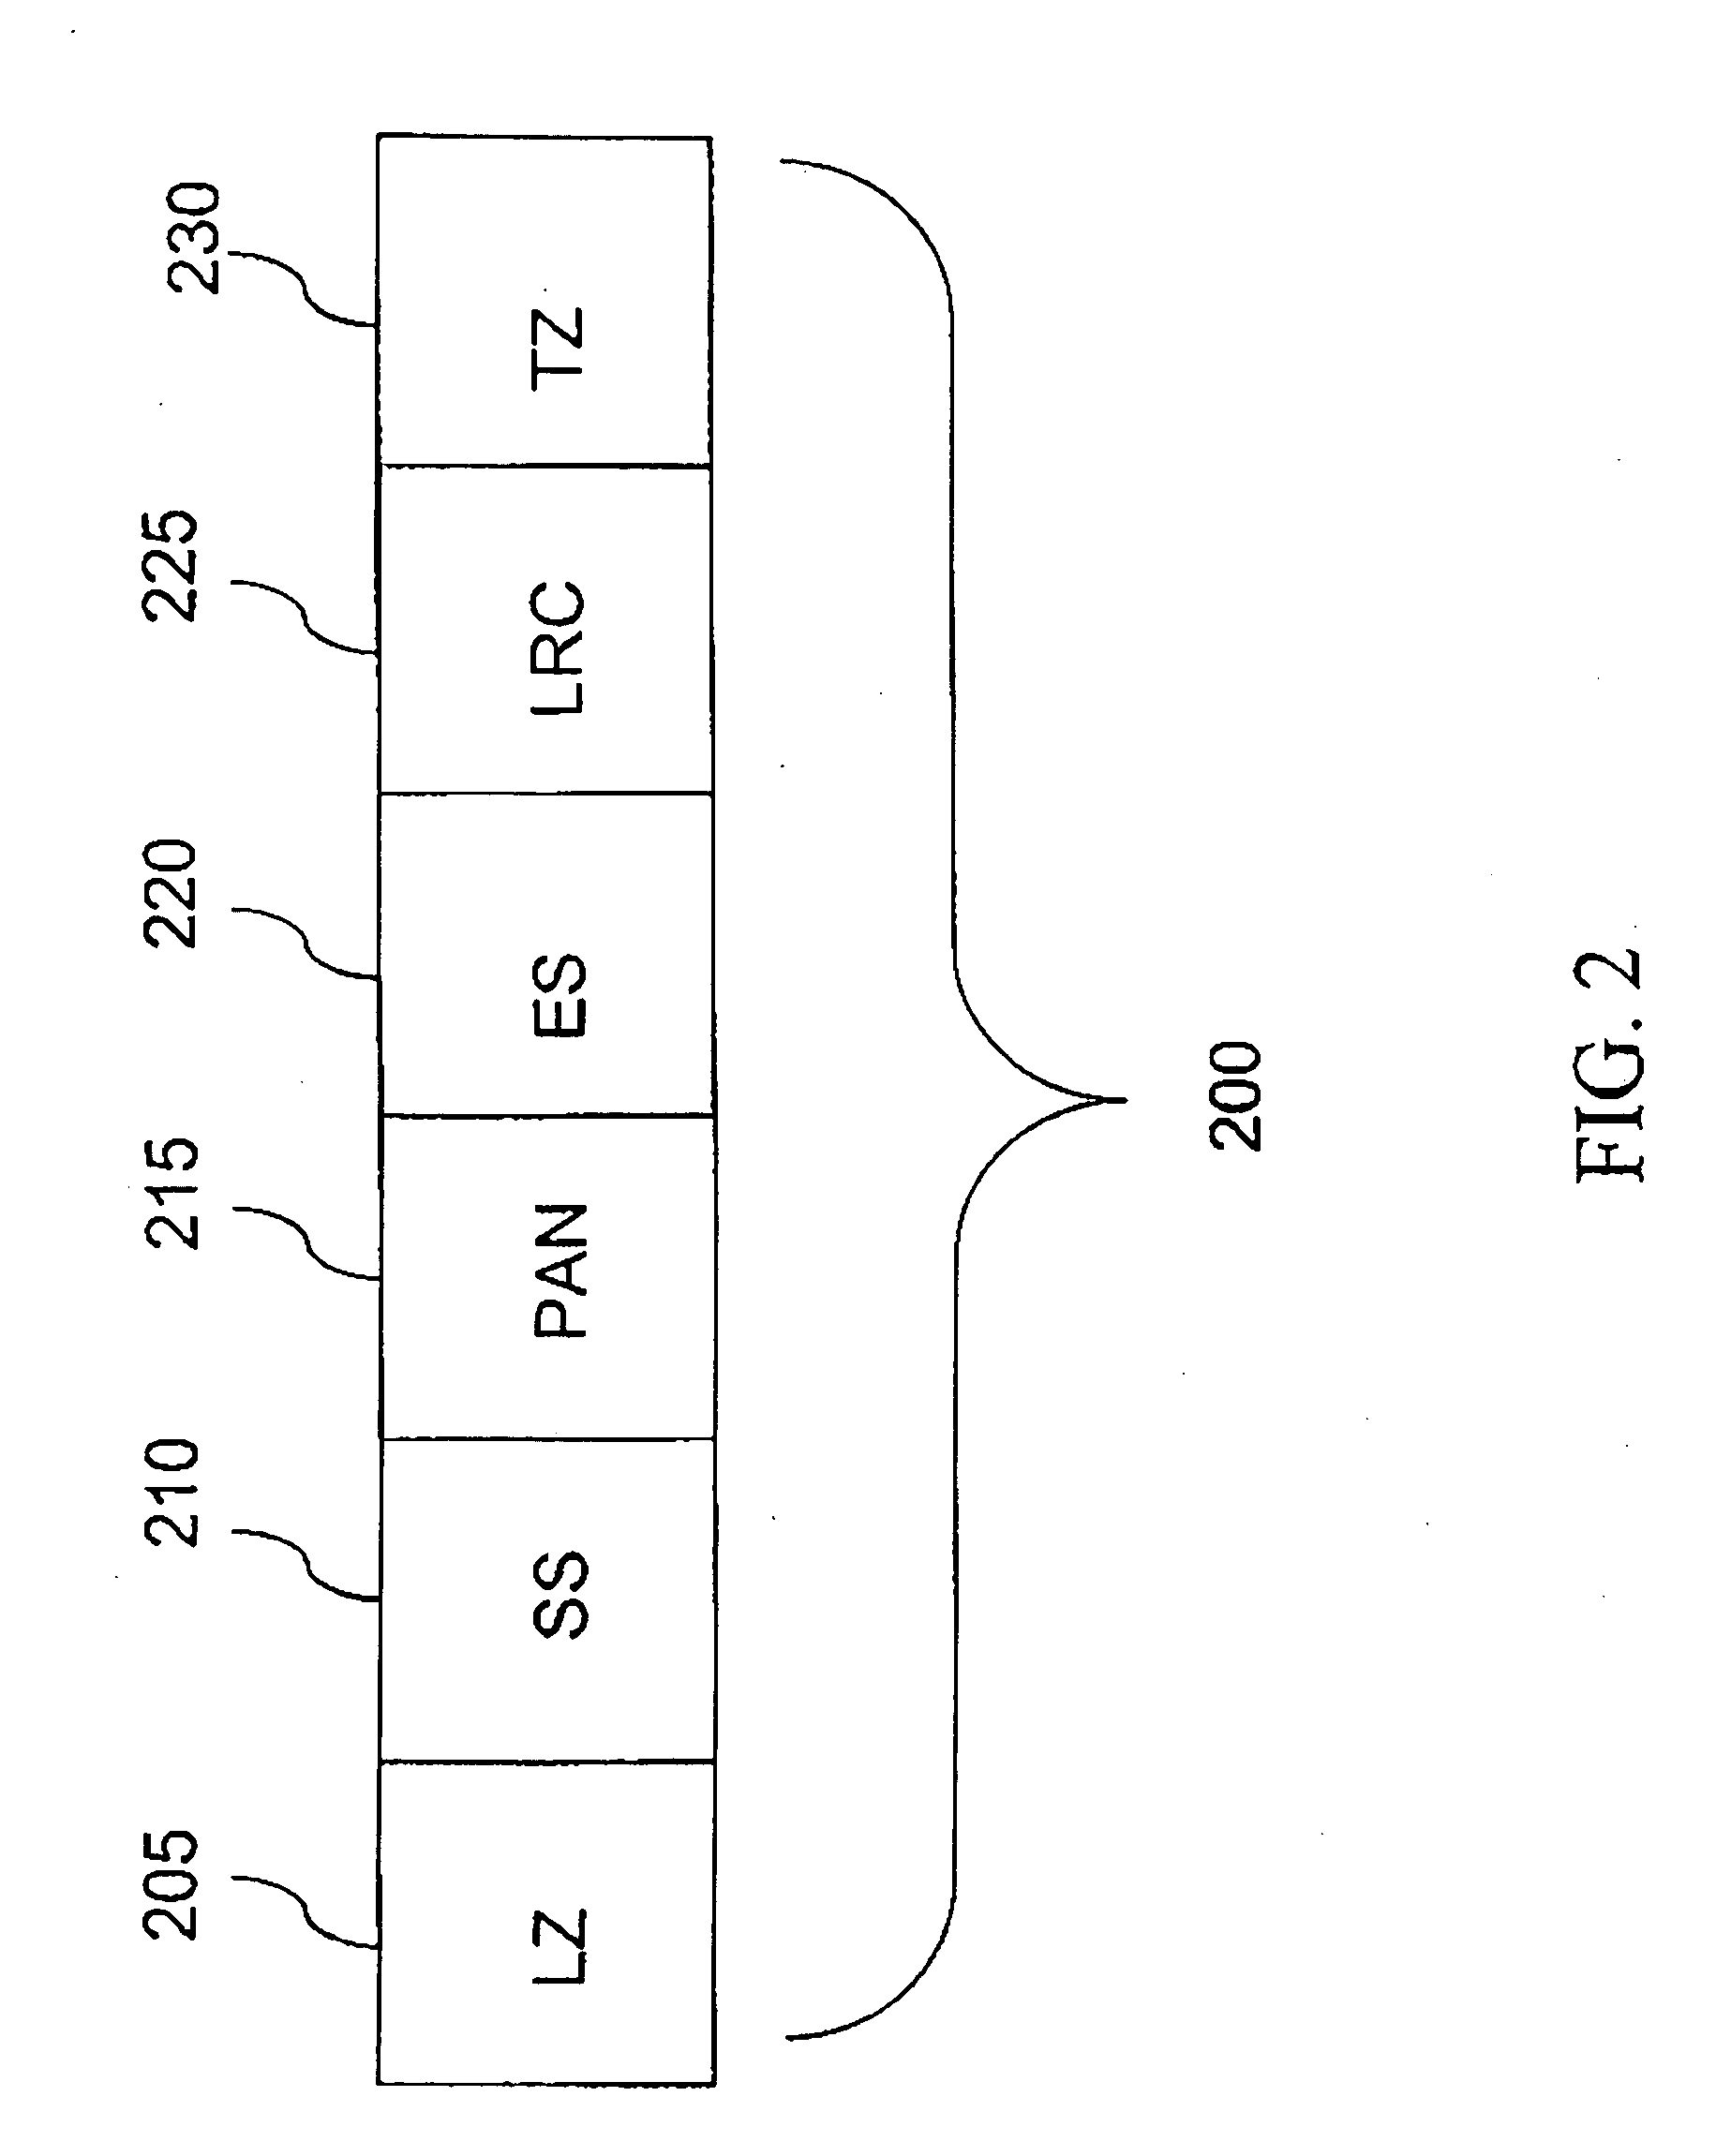 Method and apparatus for authenticating a magnetic fingerprint signal using a filter capable of isolating a remanent noise related signal component